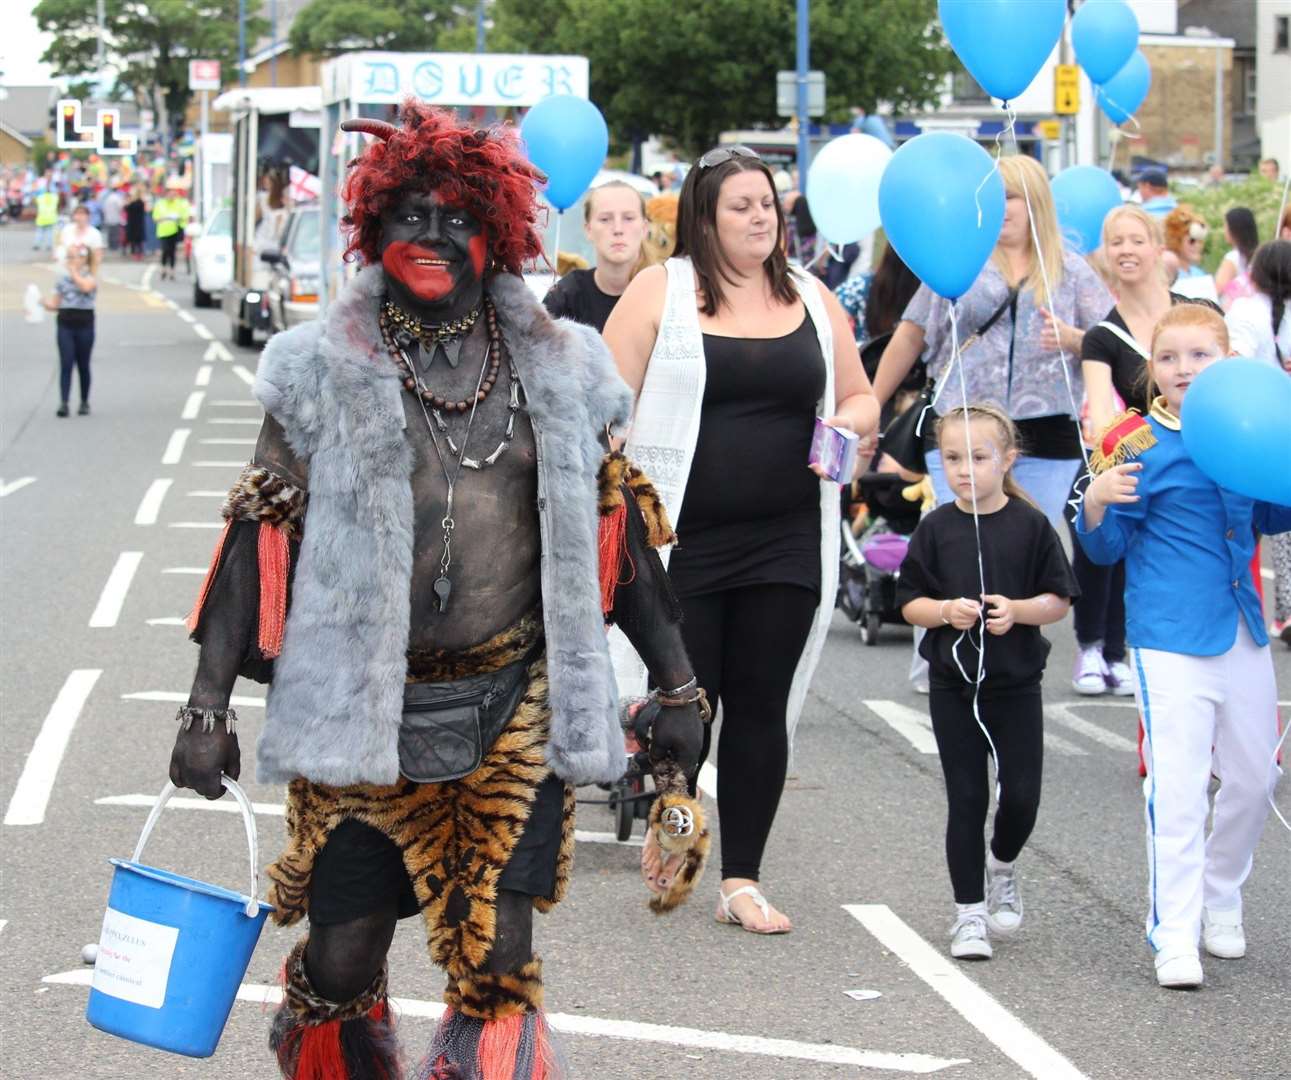 One of the Sheppey Zulus' last appearances in Sheerness in August 2015